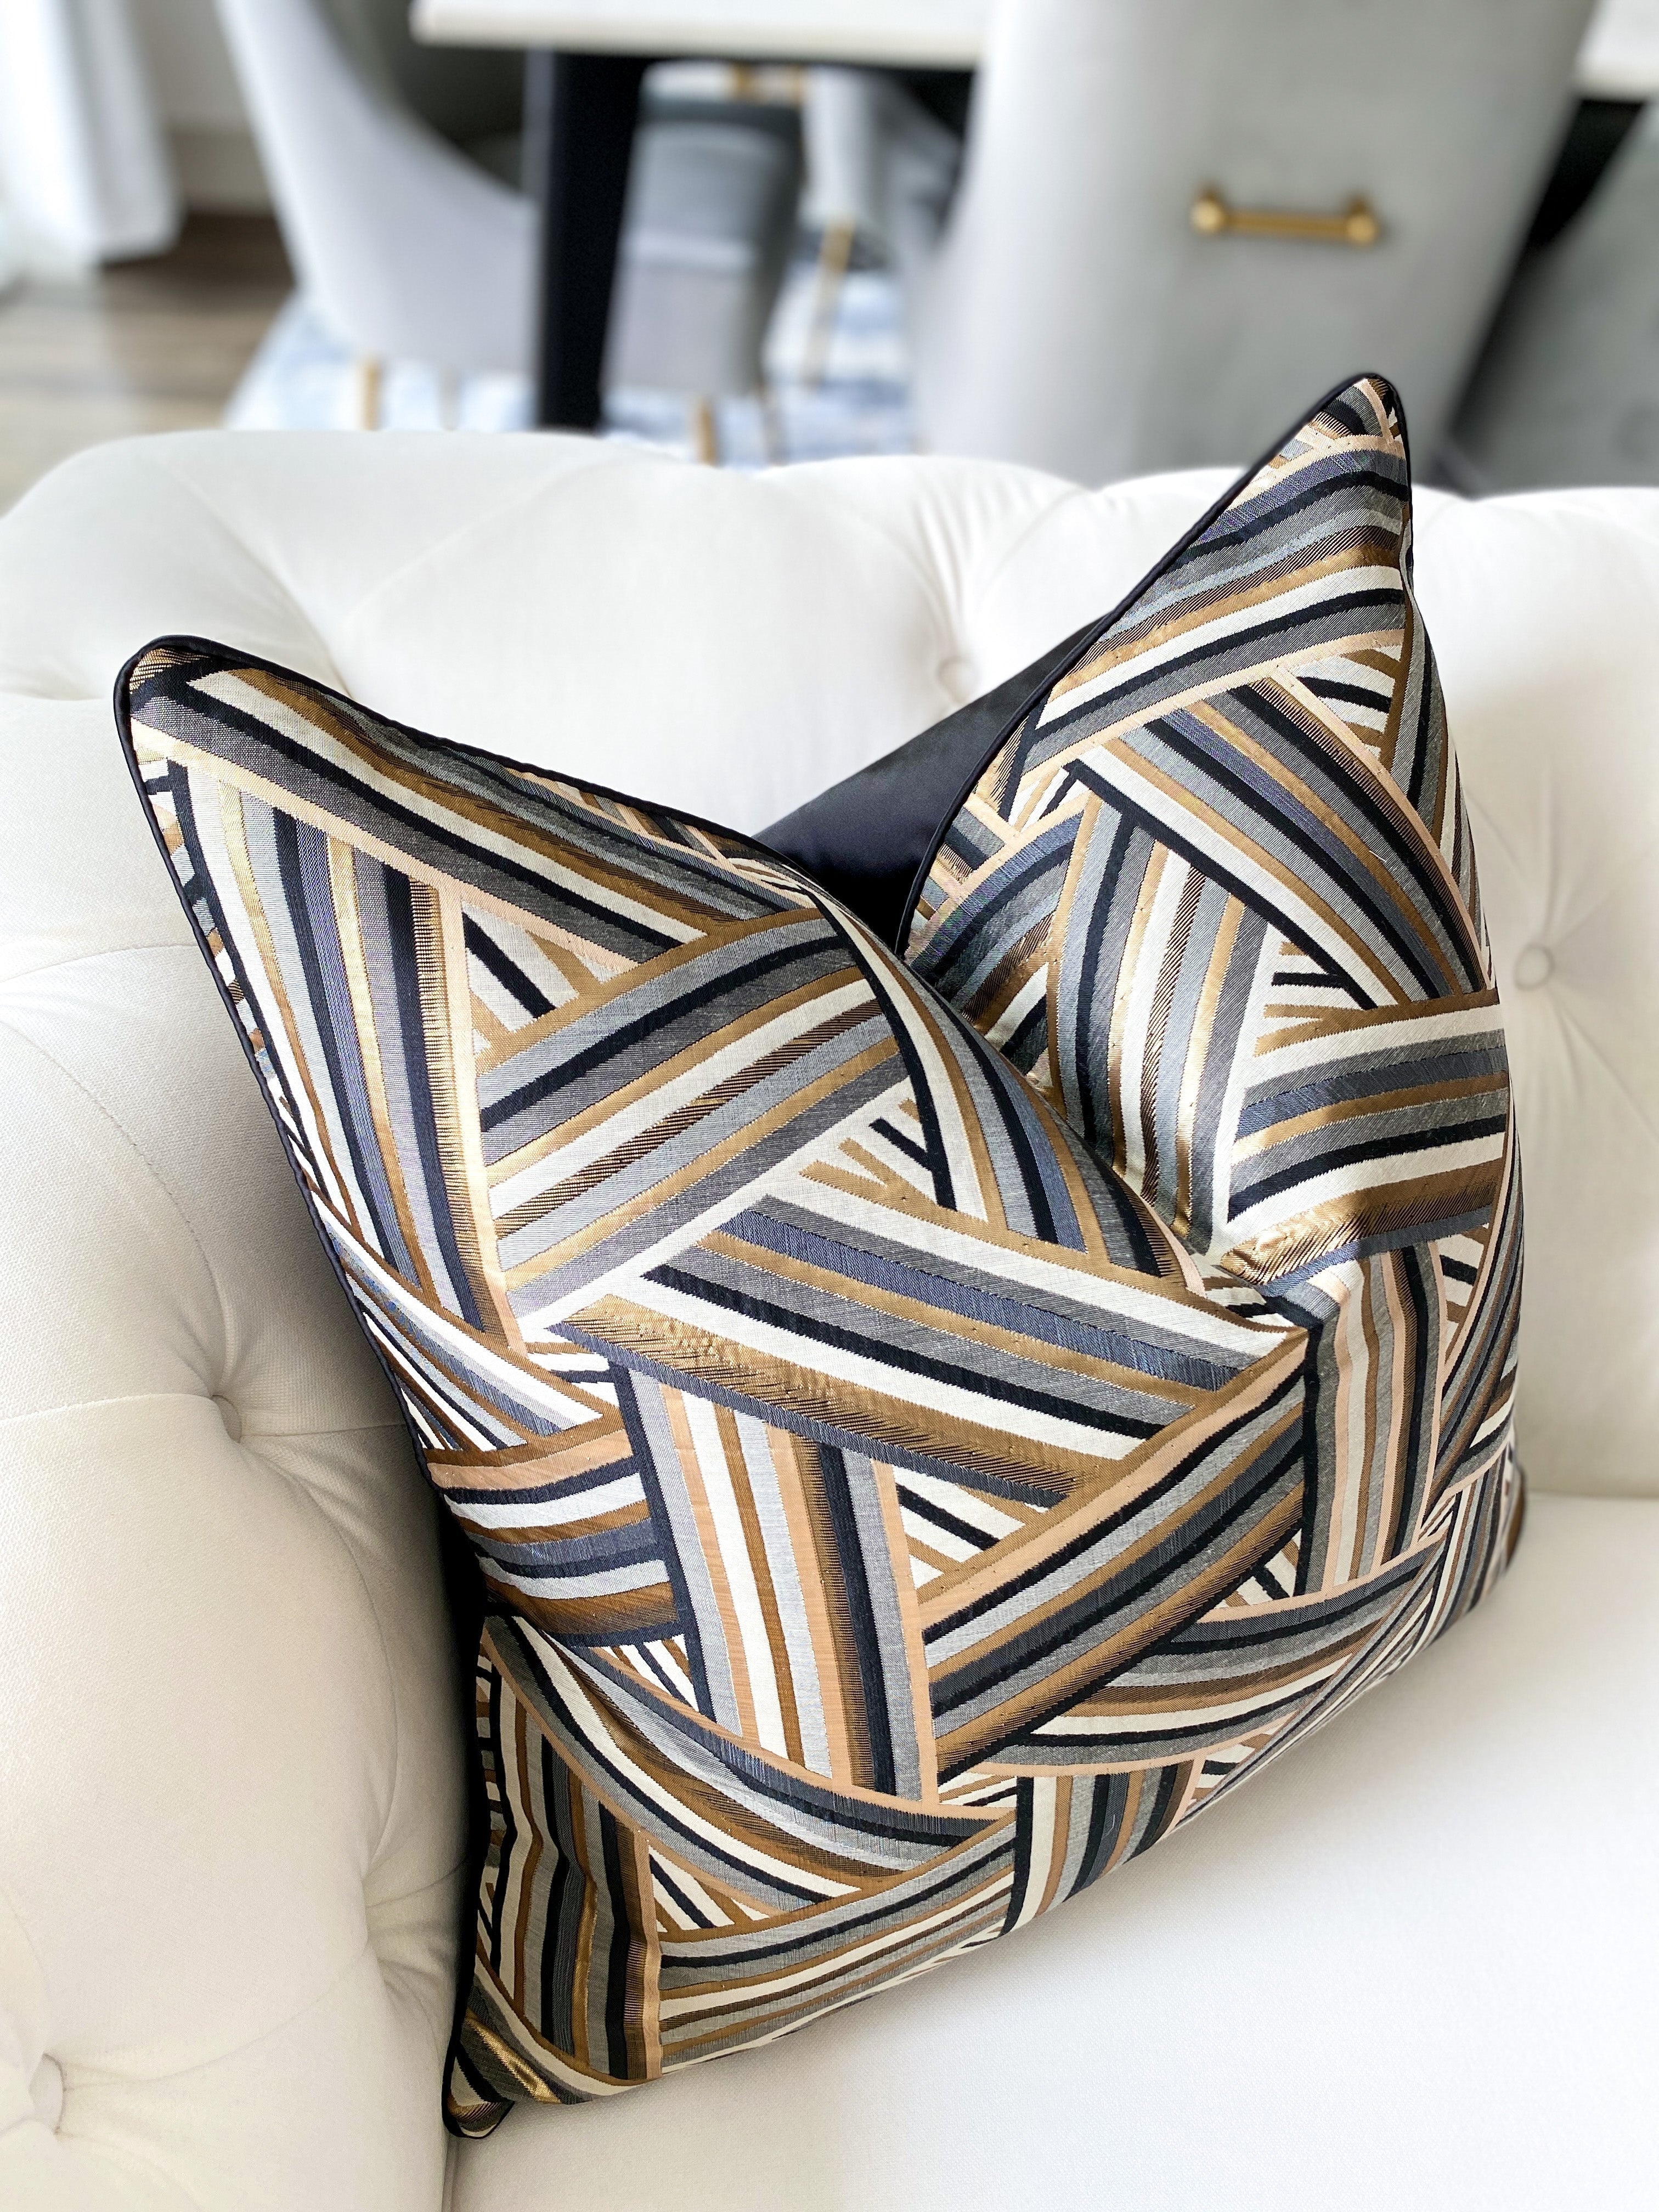 Gold & Black Pattern Pillow Cover 22x22 - HTS HOME DECOR